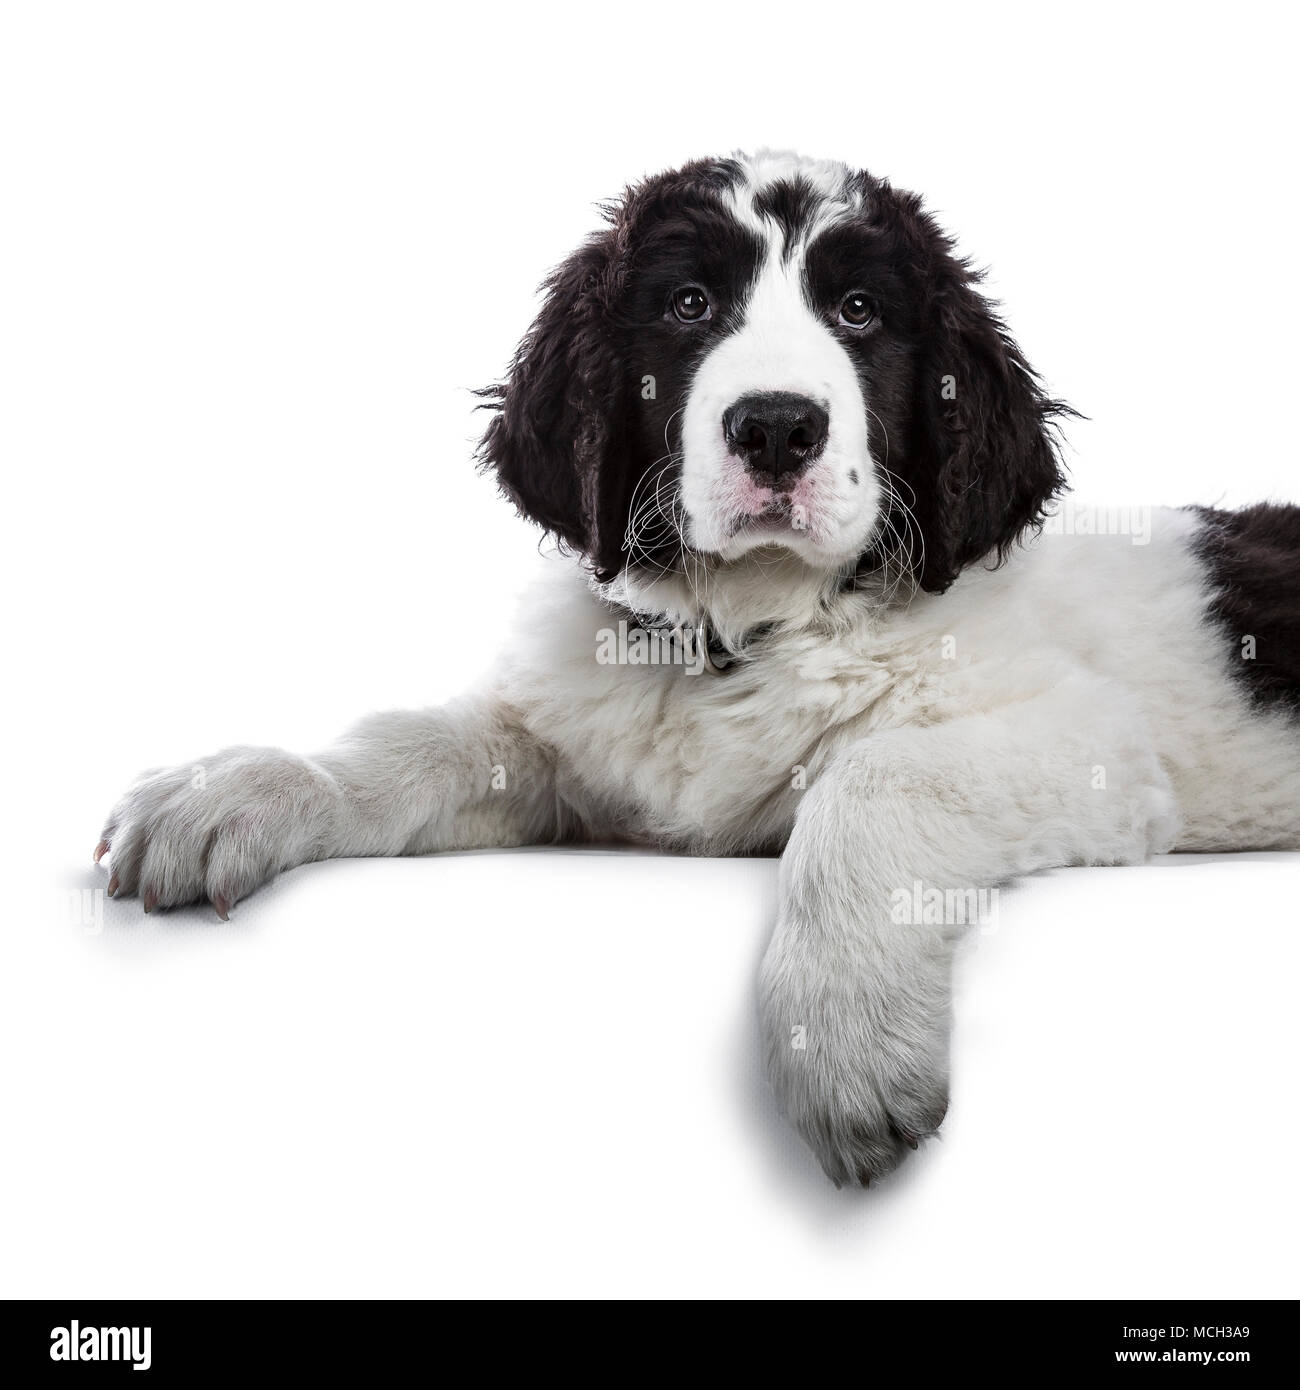 Portrait of sweet black and white Landseer pup / dog laying down with paws over edge isolated on white background looking into lens Stock Photo